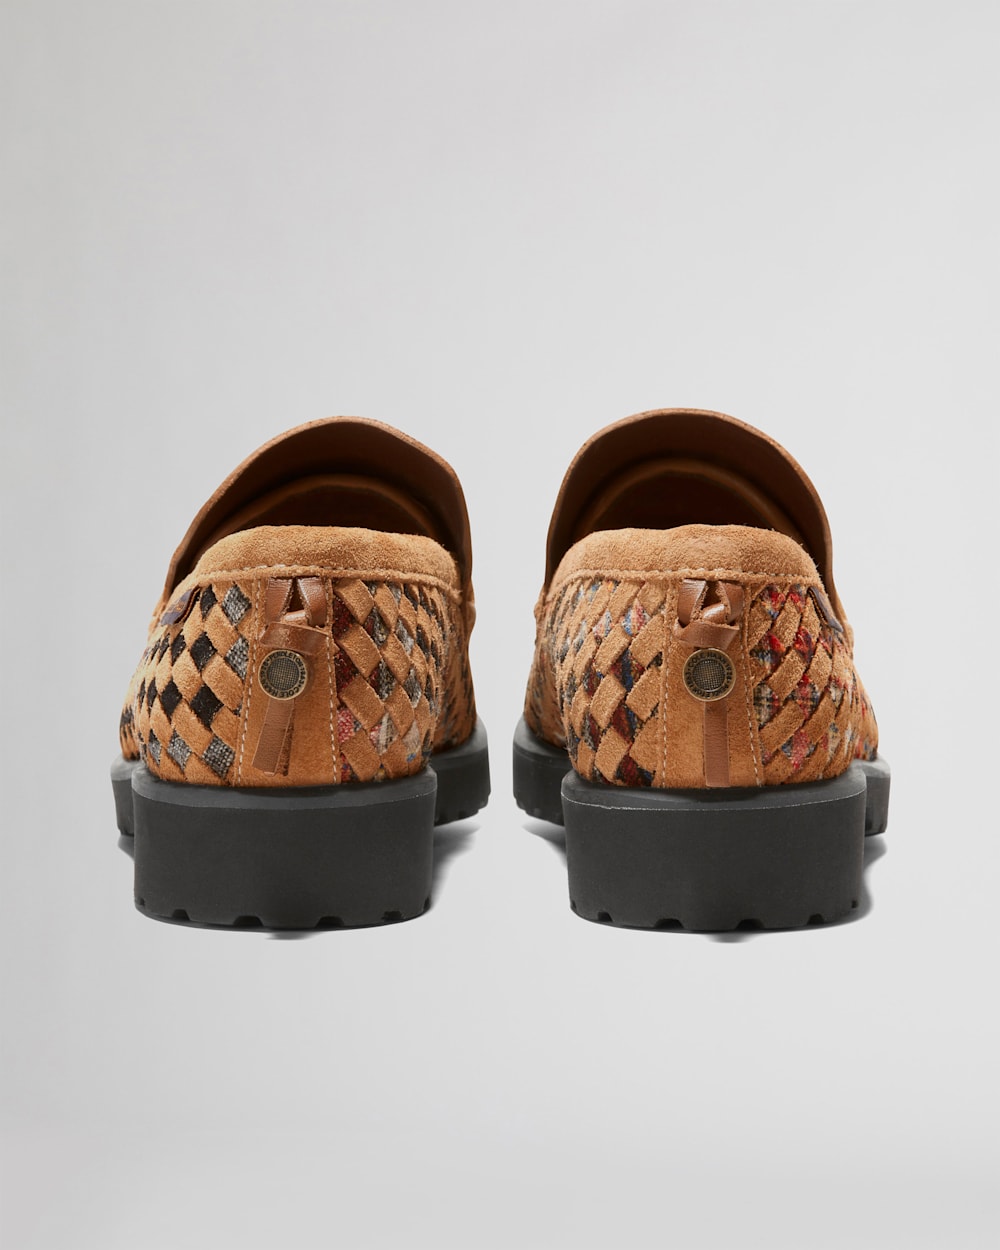 ALTERNATE VIEW OF COLE HAAN X PENDLETON WOMEN'S GENEVA PENNY LOAFERS IN ACADIA PLAID image number 3